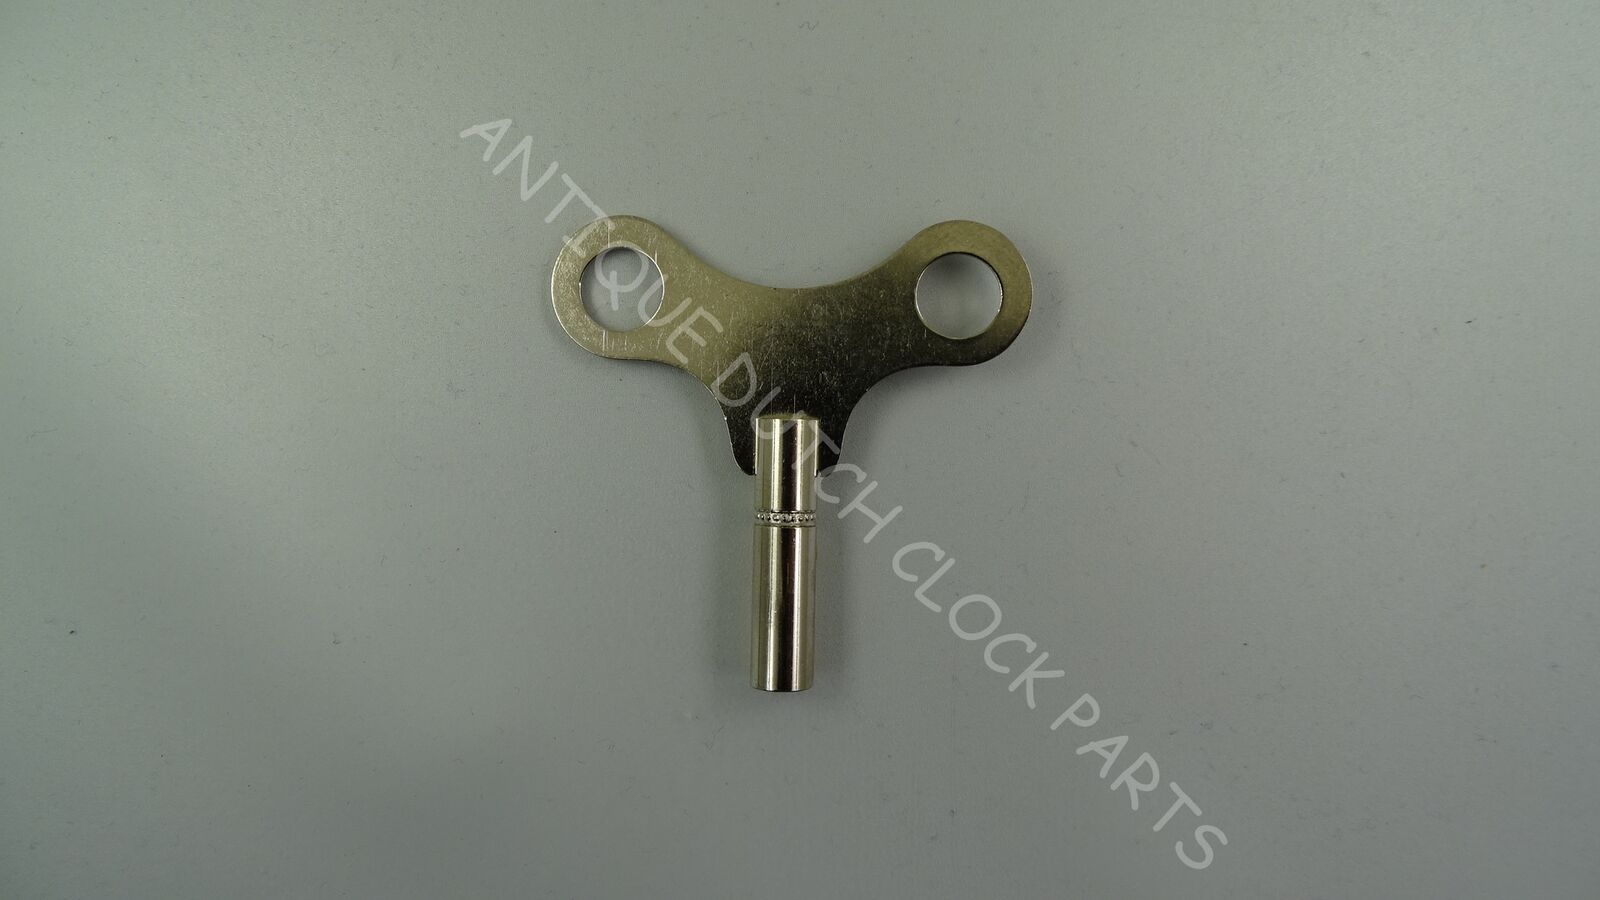 Ranking TOP14 NEW CLOCK WINDING KEYS AVAILABLE SIZES Max 83% OFF ALL